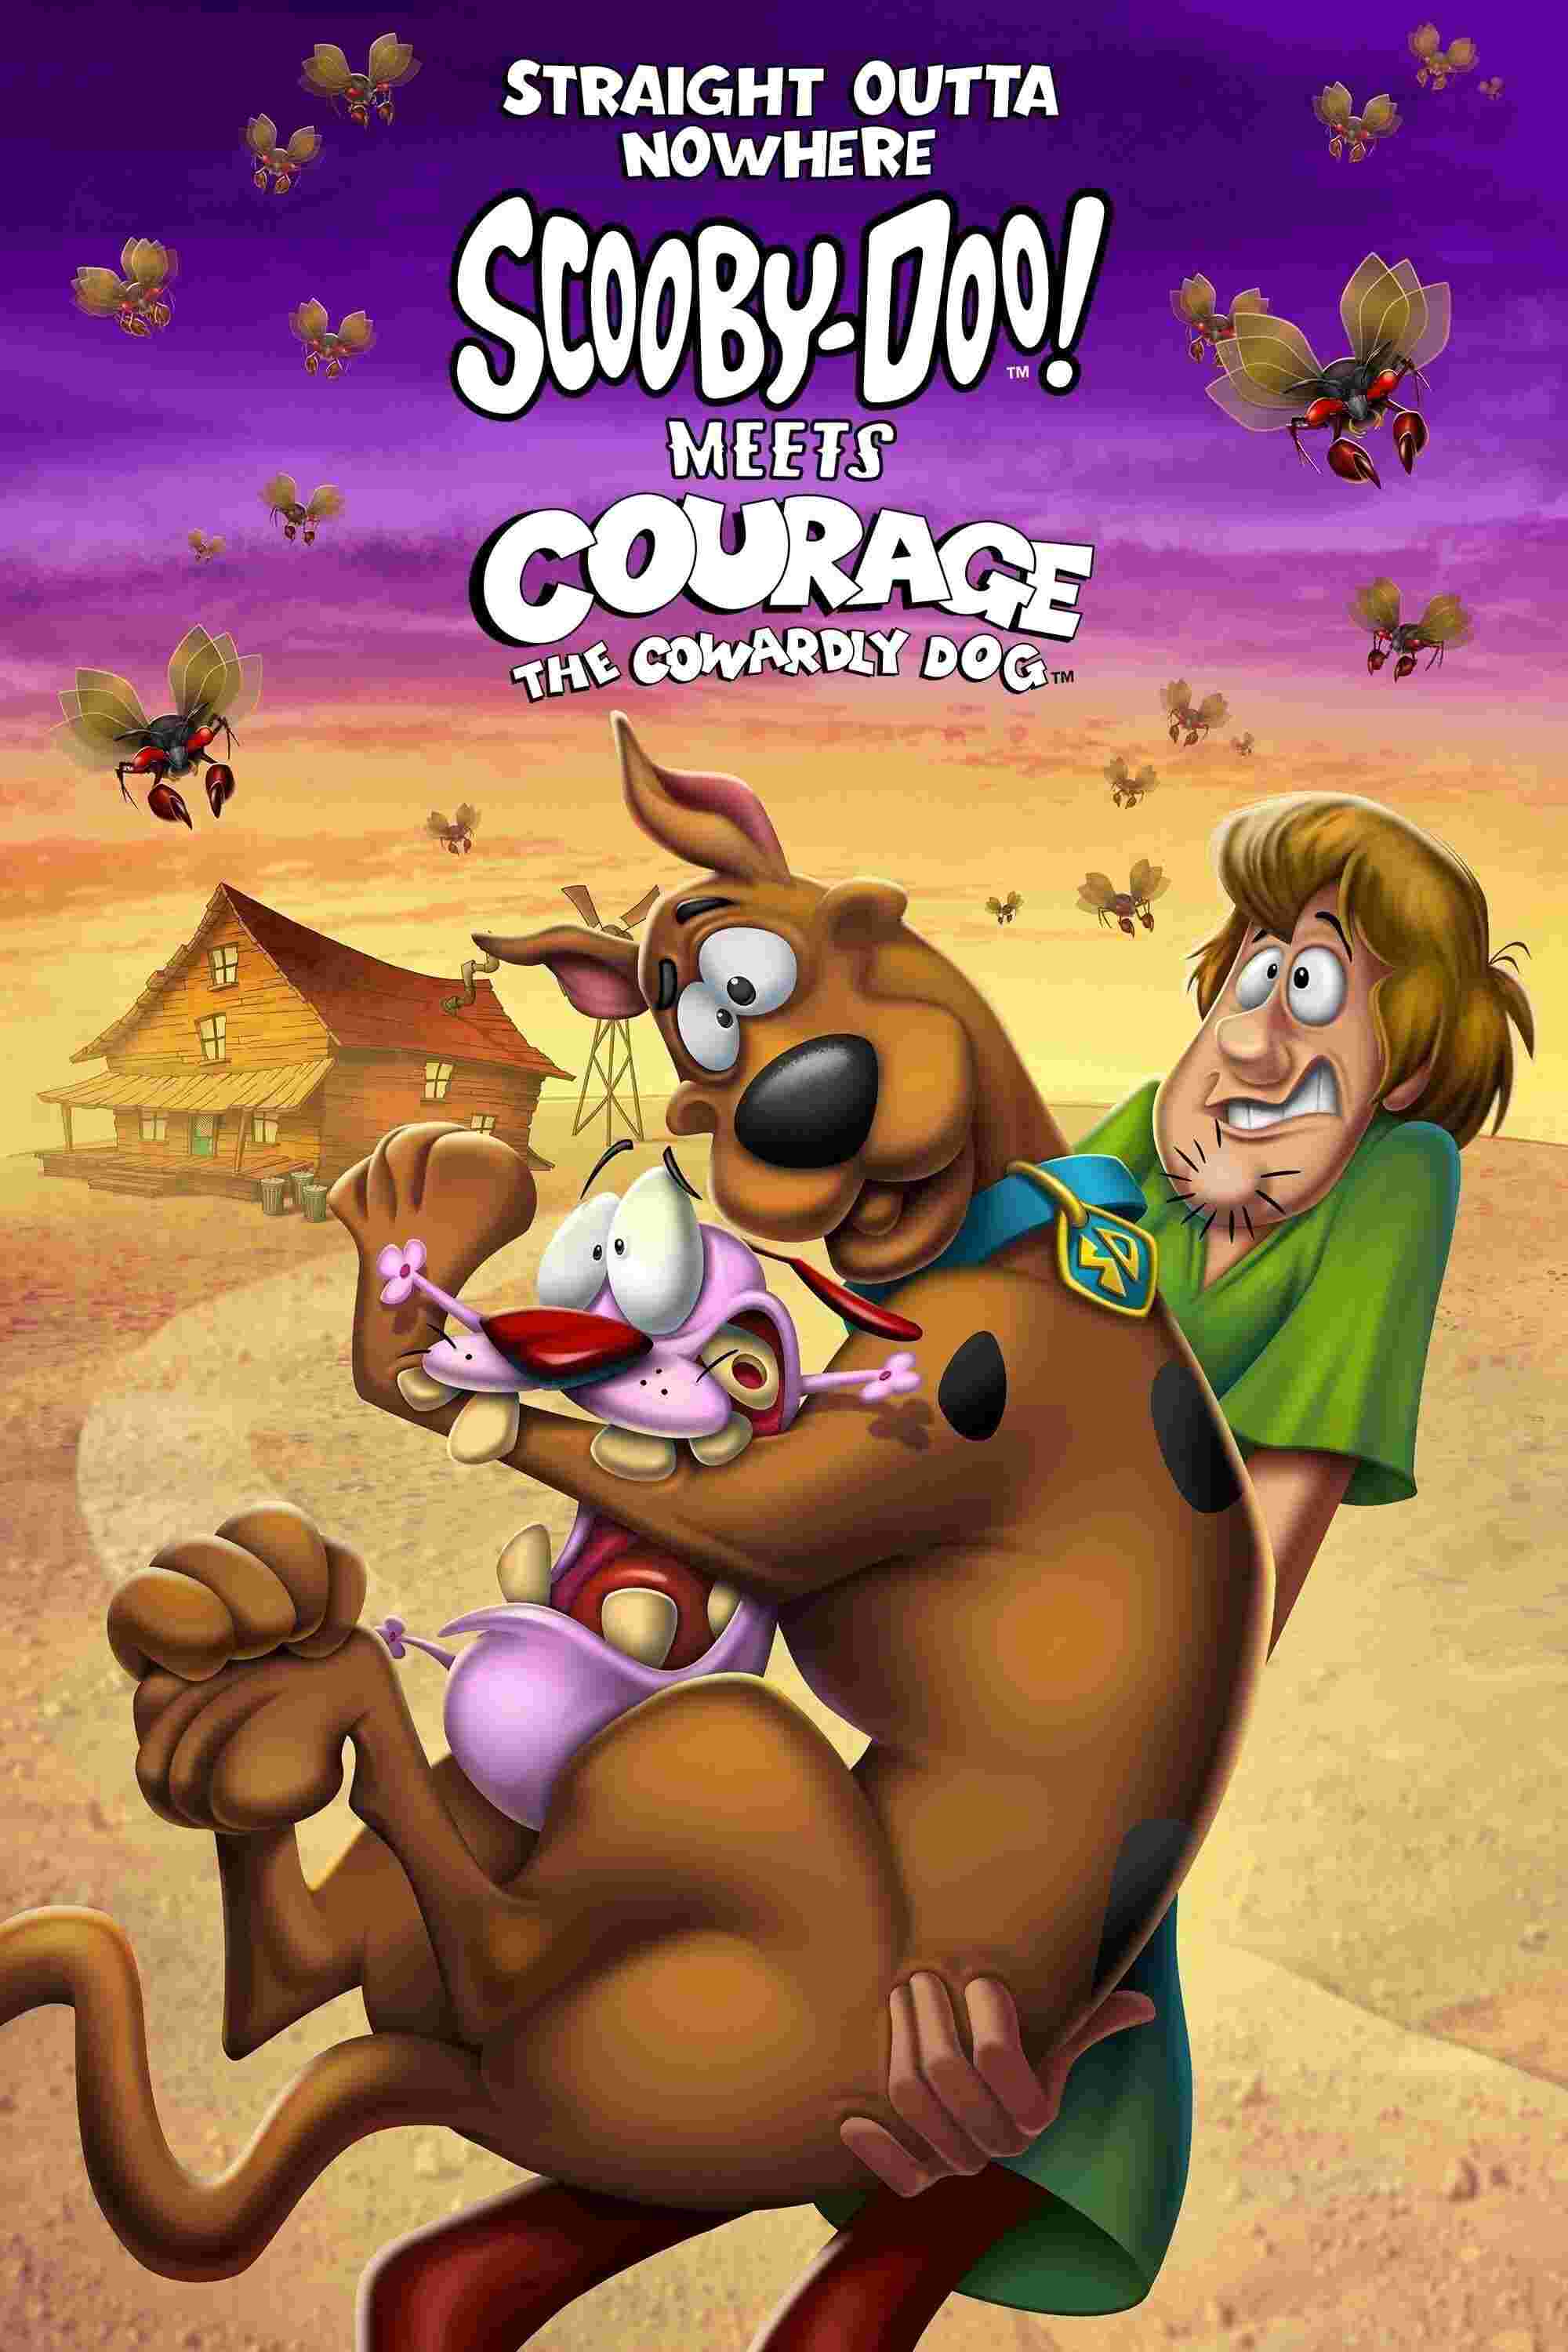 Straight Outta Nowhere: Scooby-Doo! Meets Courage the Cowardly Dog (2021) Jeff Bergman